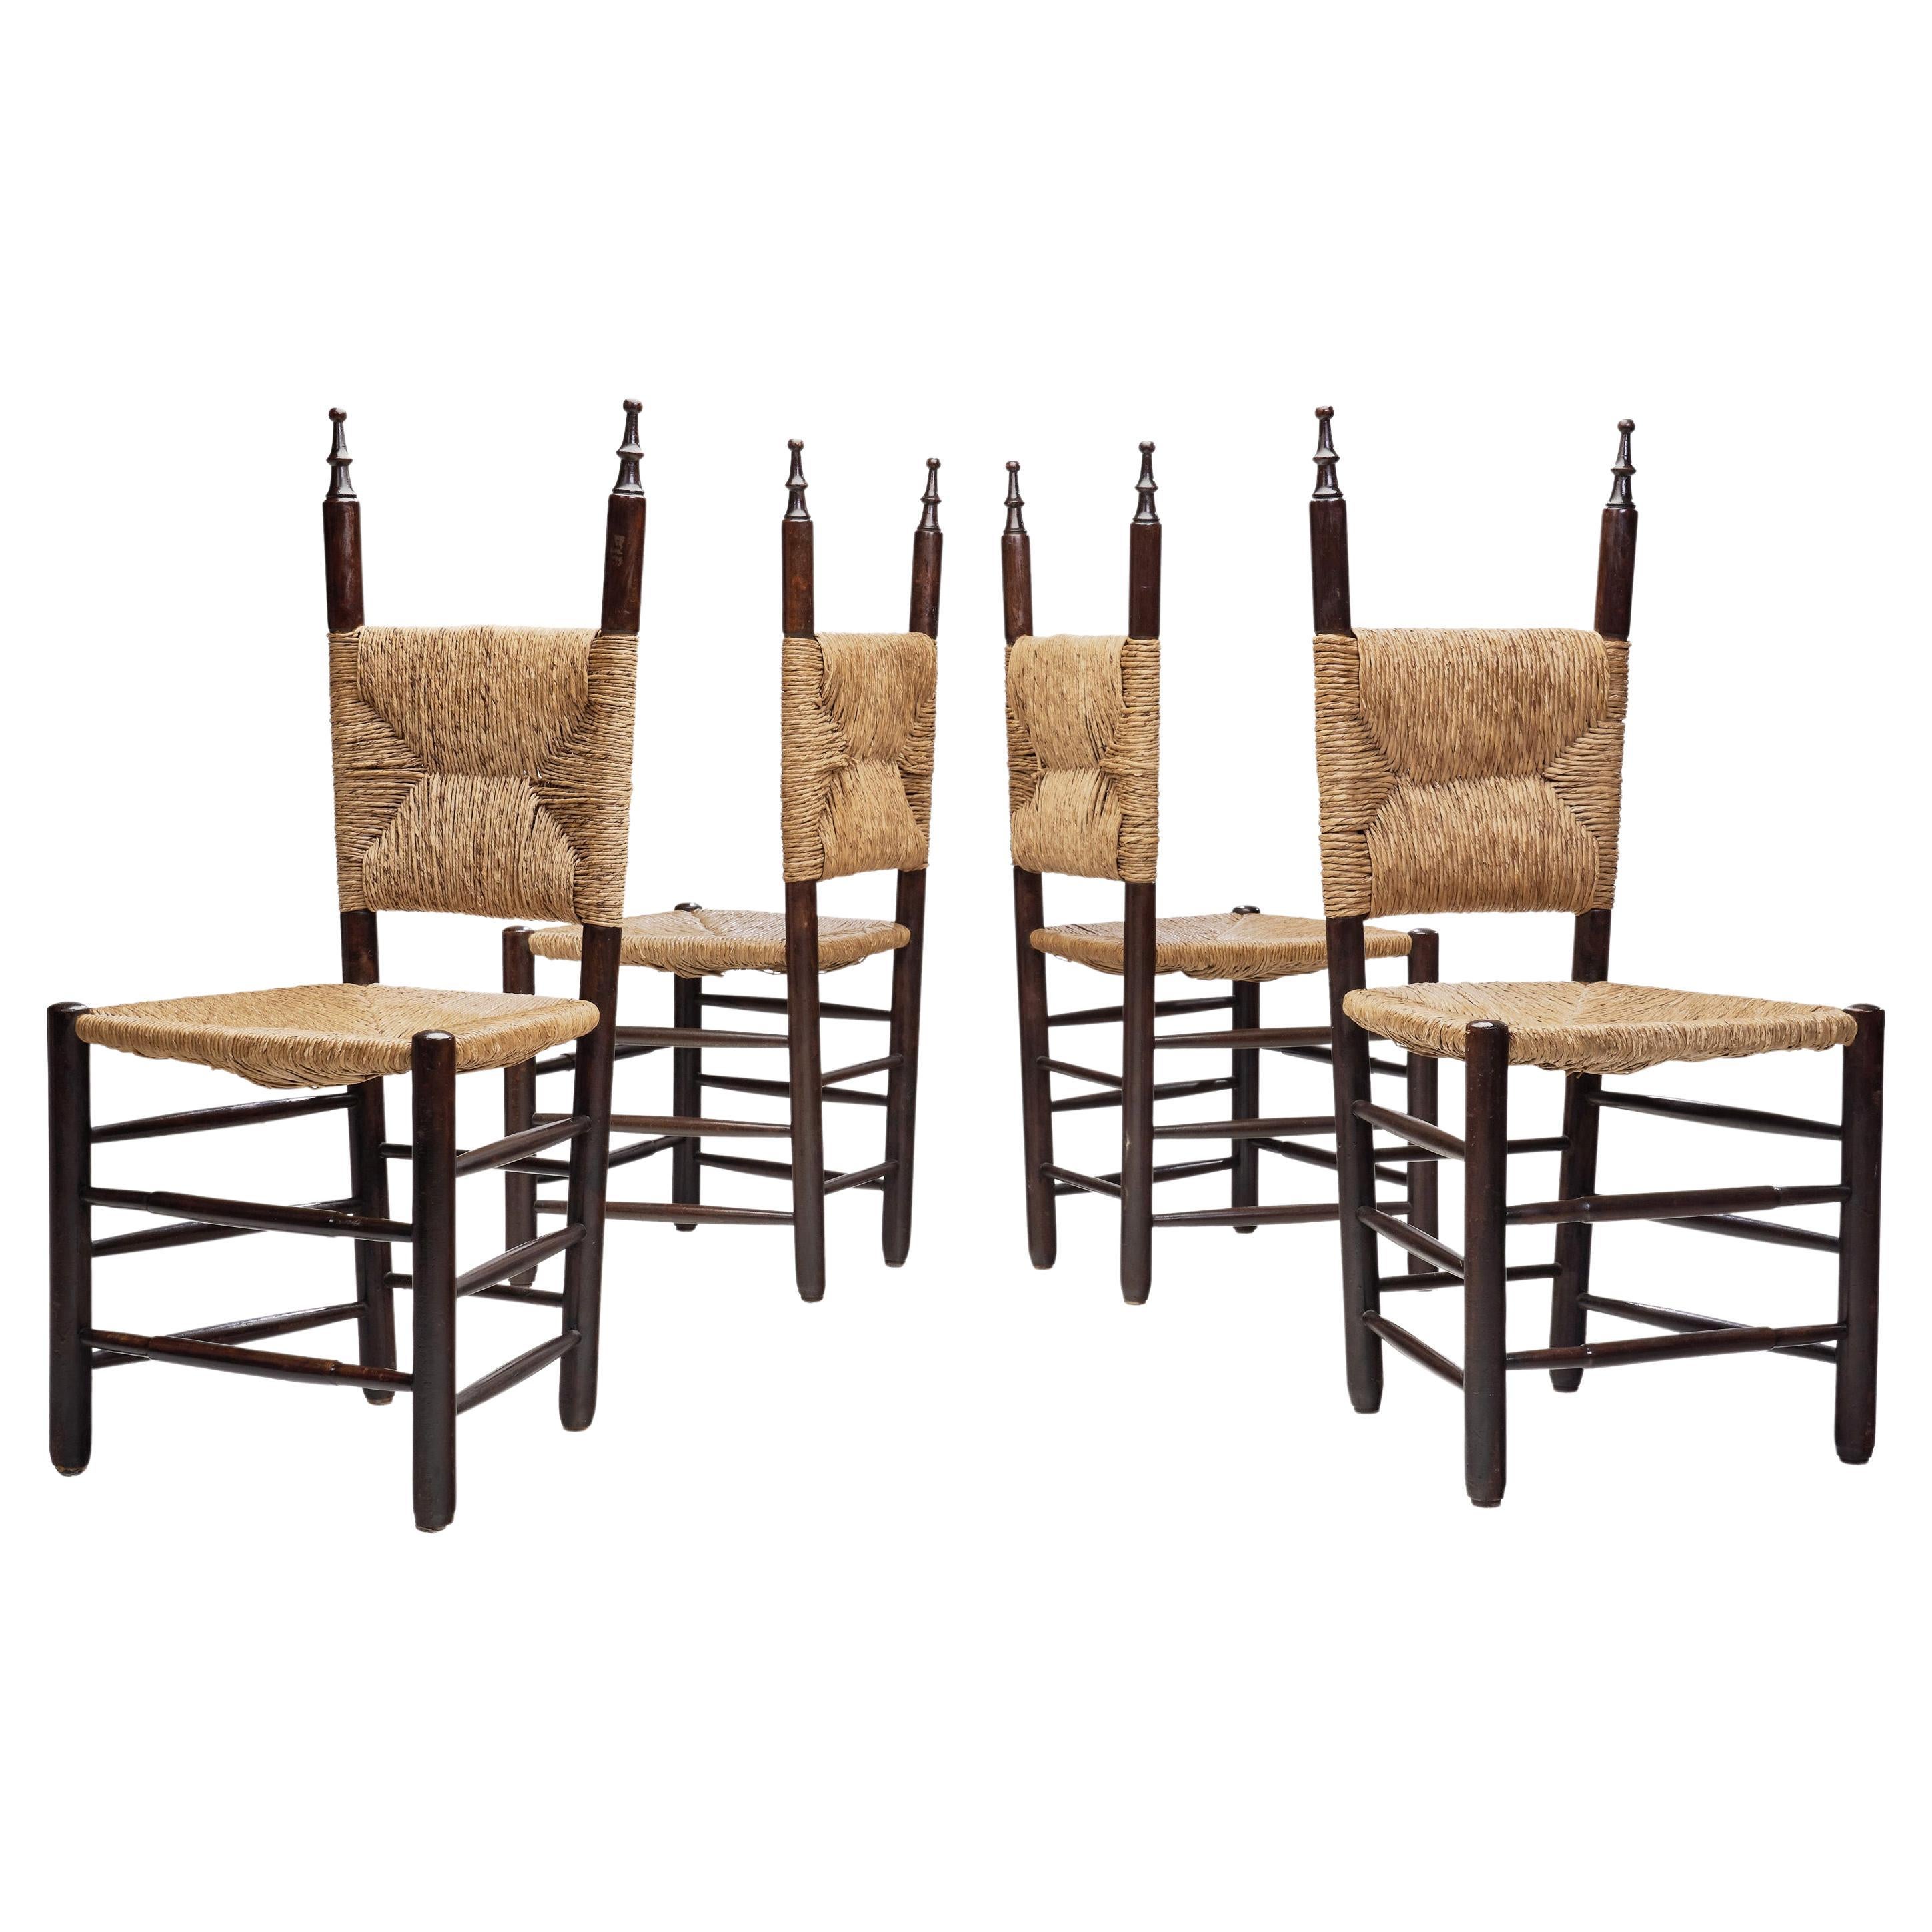 Set of Four Dining Chairs with Poplar Wood and Rush Seats, Europe ca 1950s